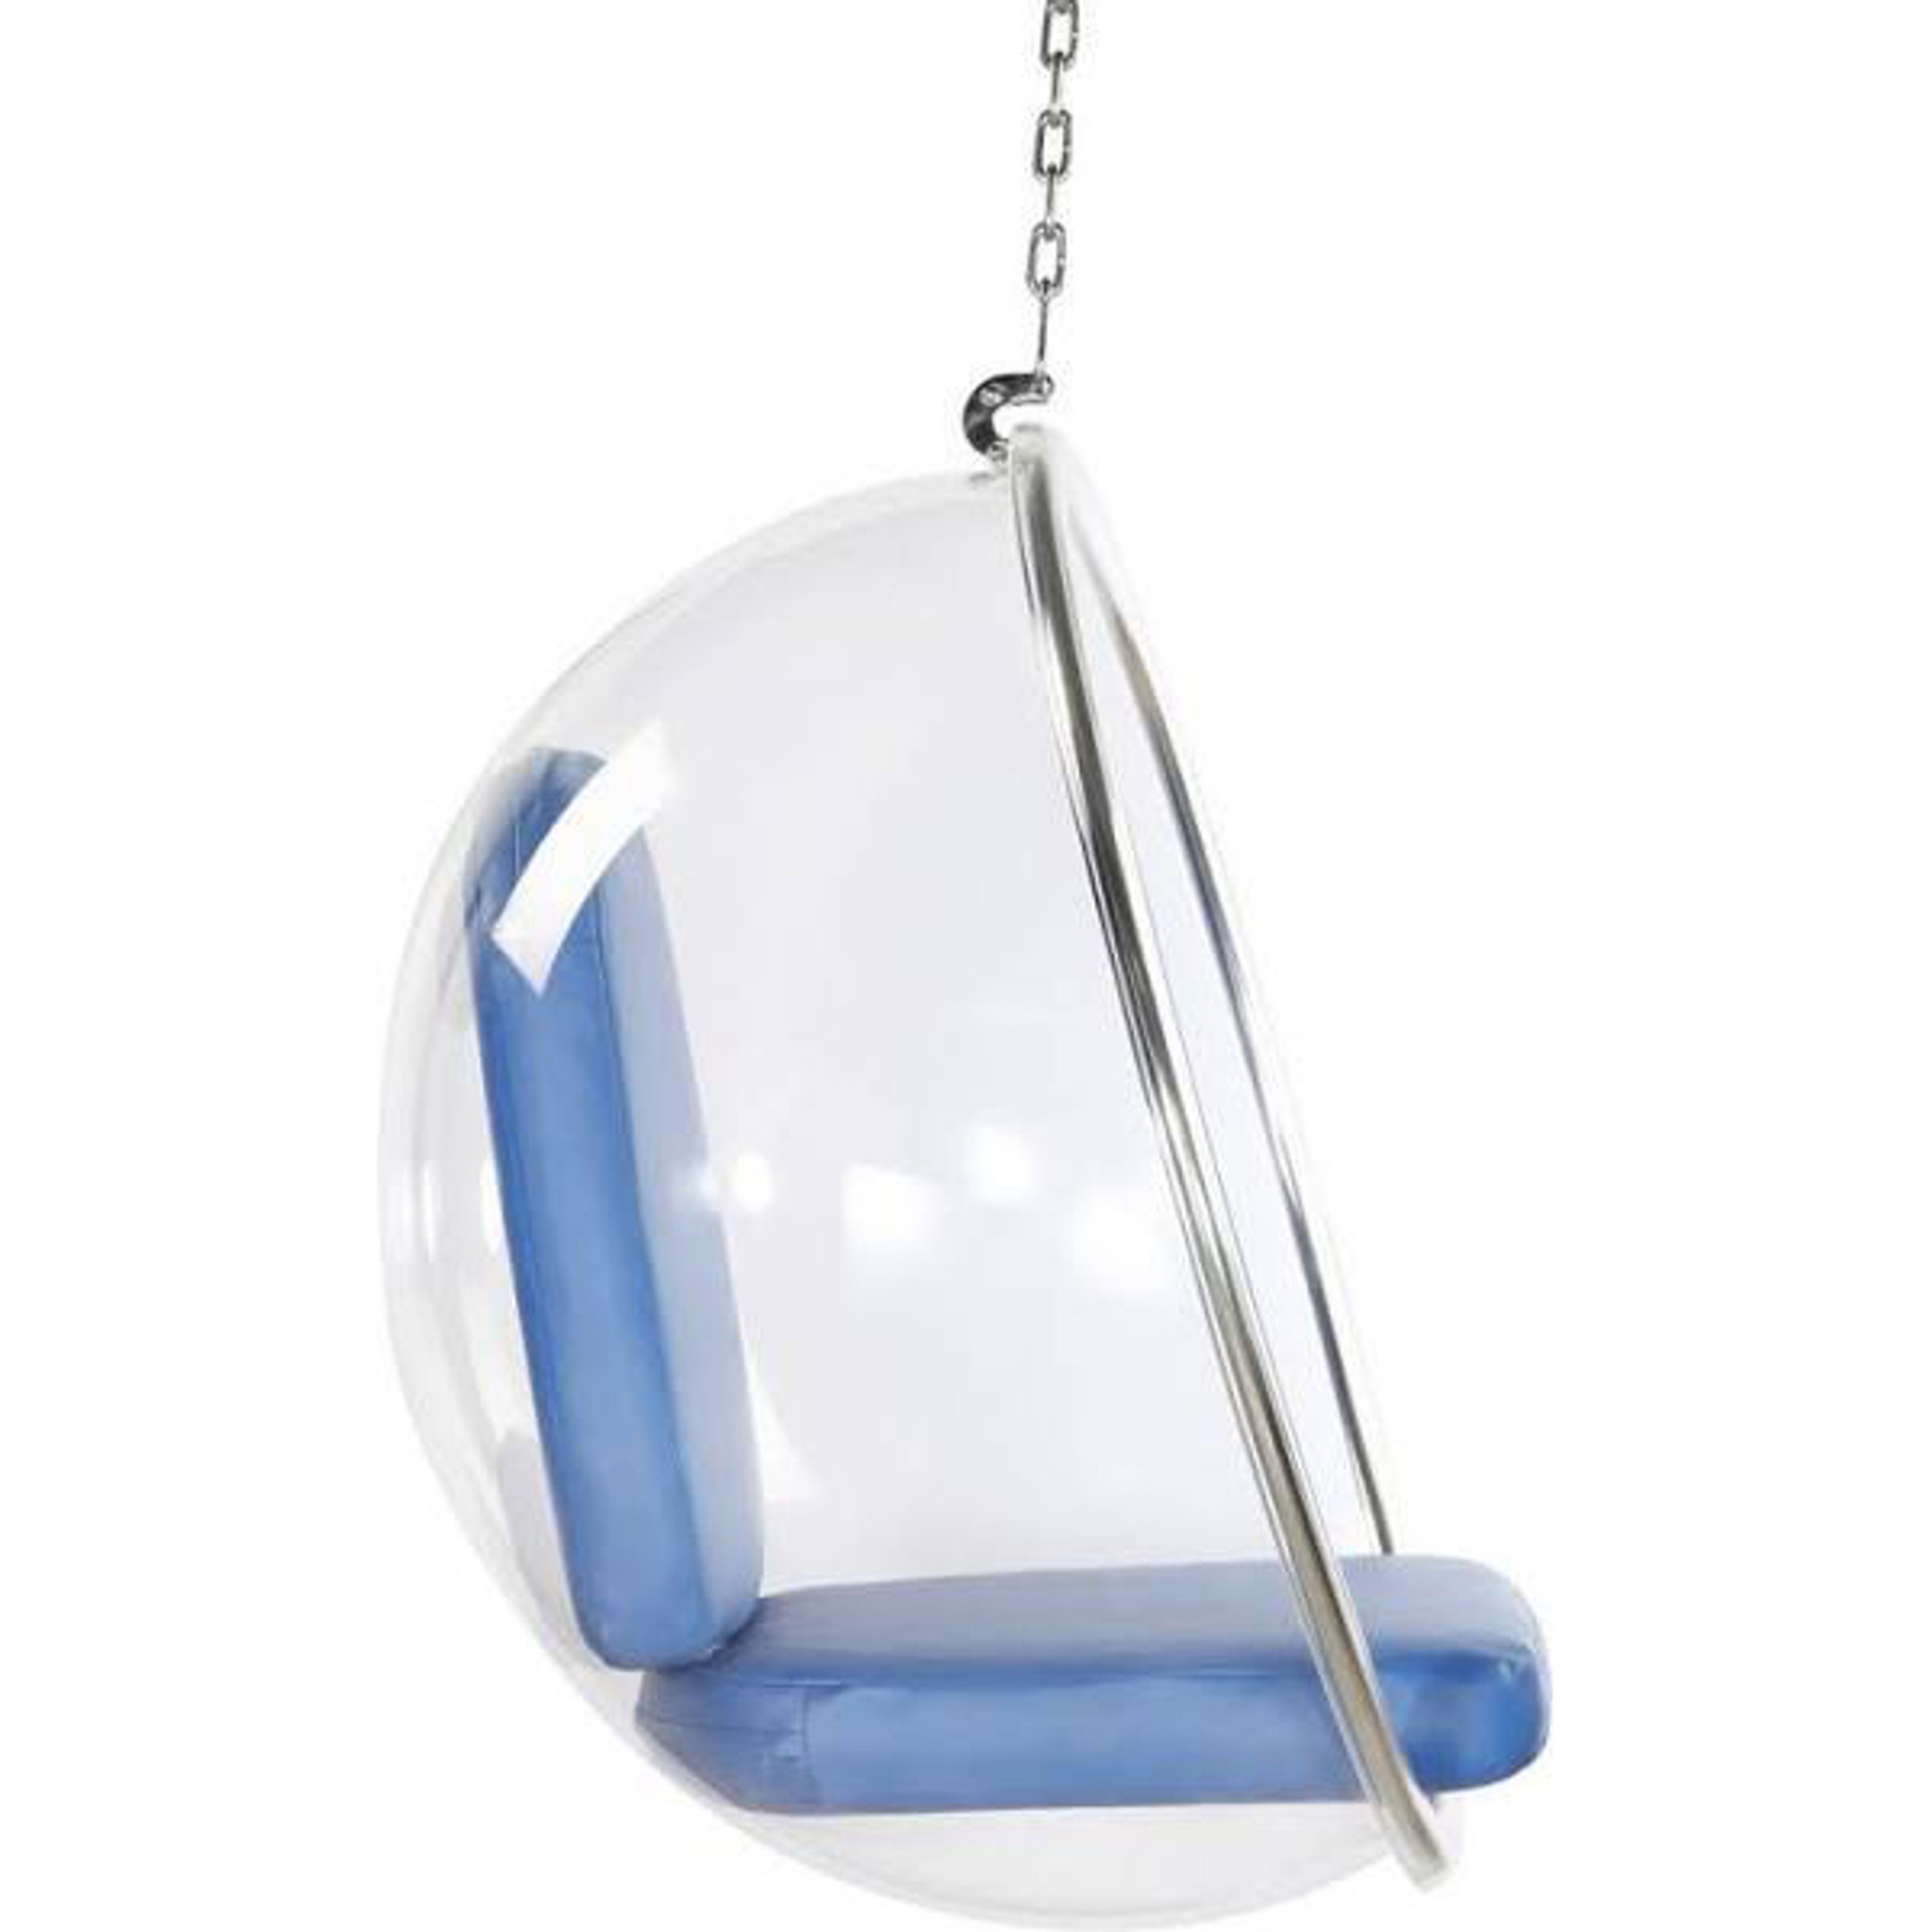 finemod  FMI1122 clear hanging bubble chair acrylic lucite plastic chrome chain blue cushions